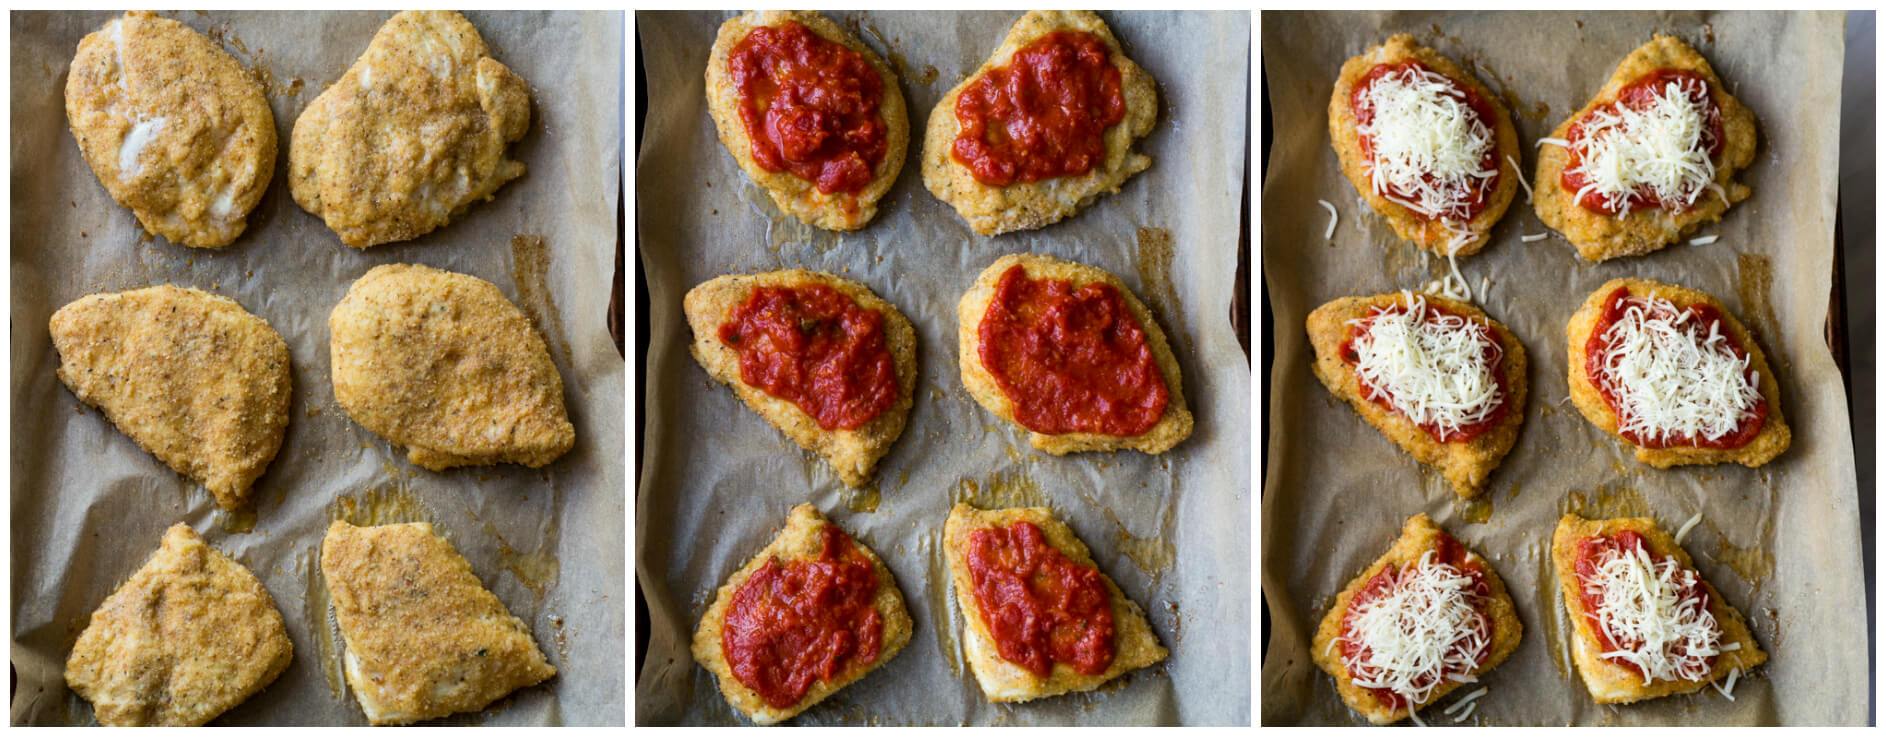 Baked Chicken Parmesan - lightly breaded chicken breast topped with marinara sauce and cheese, then baked until tender crisp. It's healthy and quick to make! | littlebroken.com @littlebroken